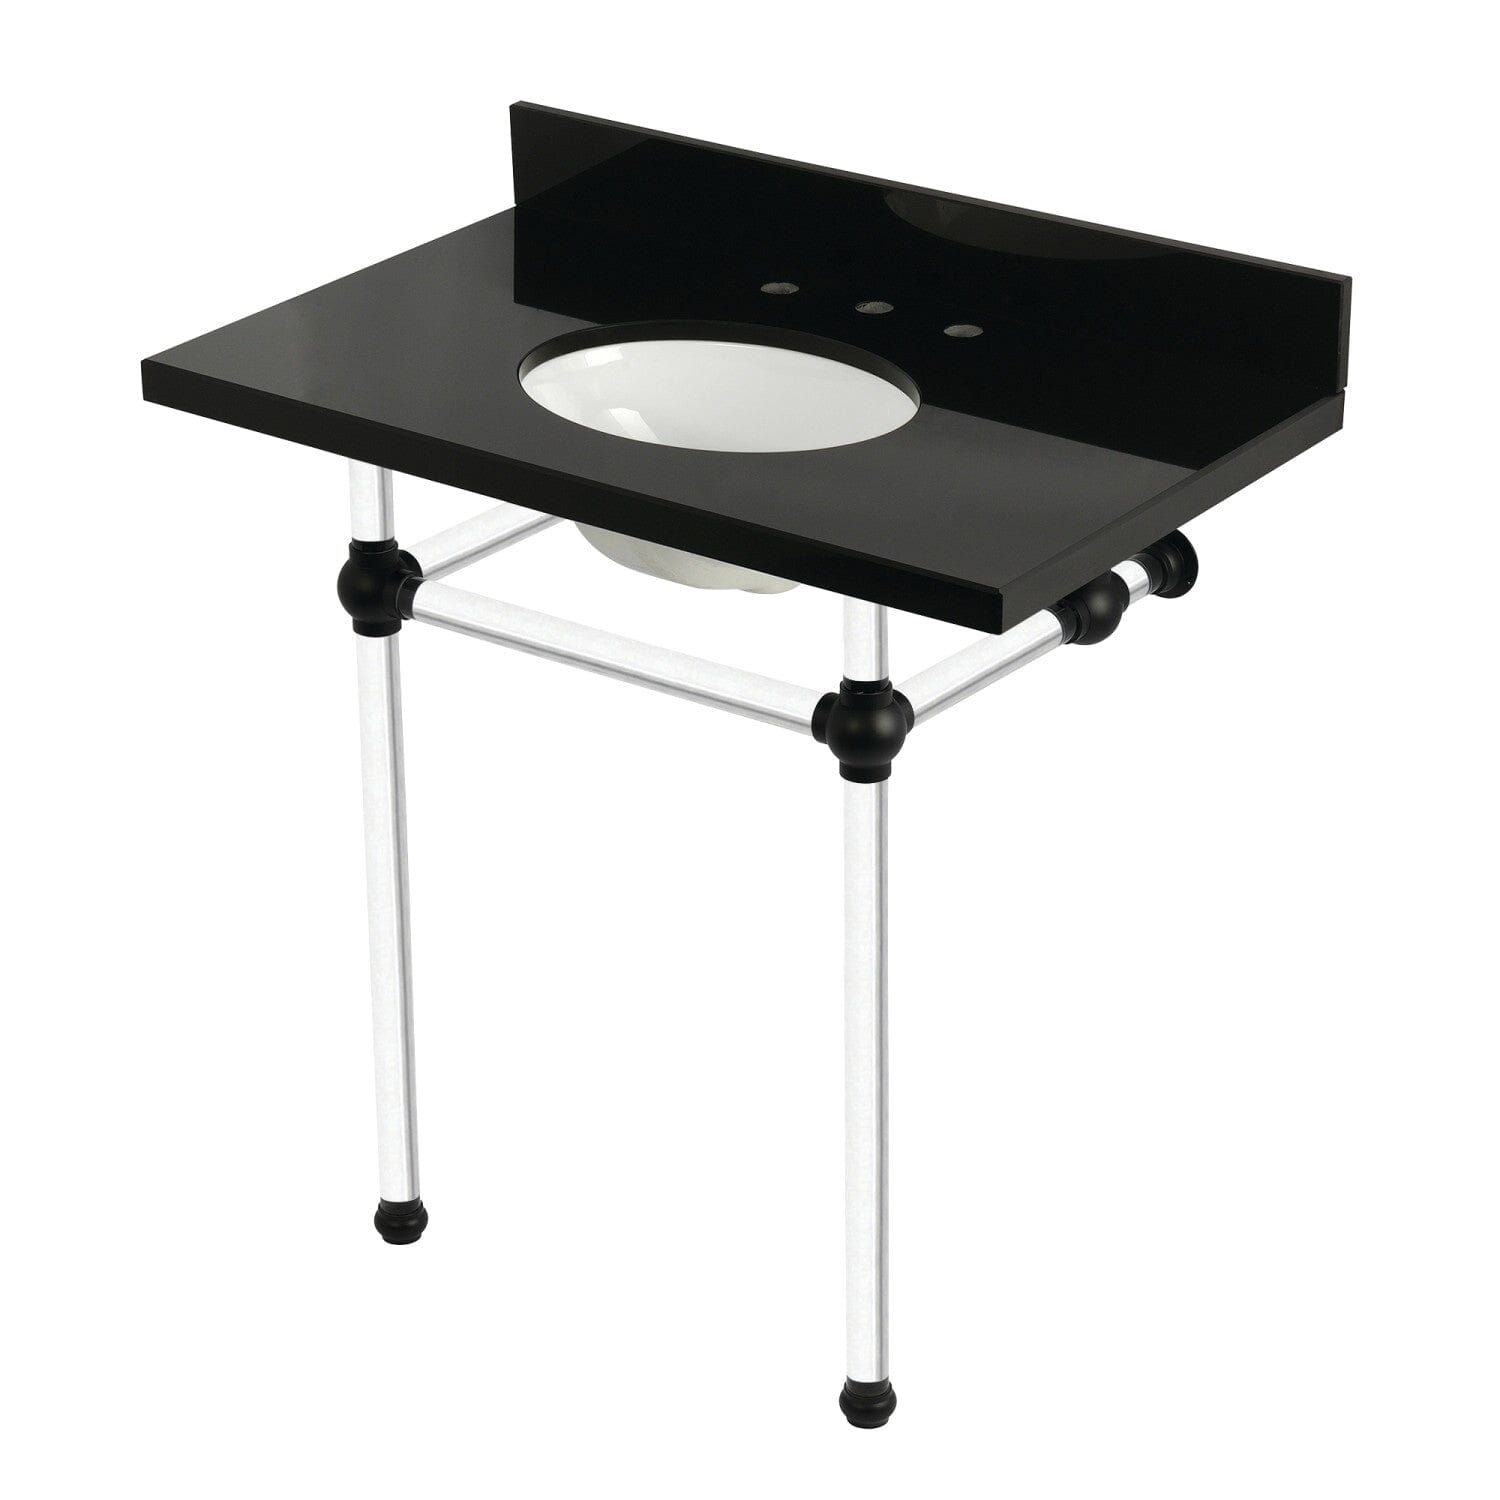 Templeton 36-Inch Black Granite Console Sink with Acrylic Legs